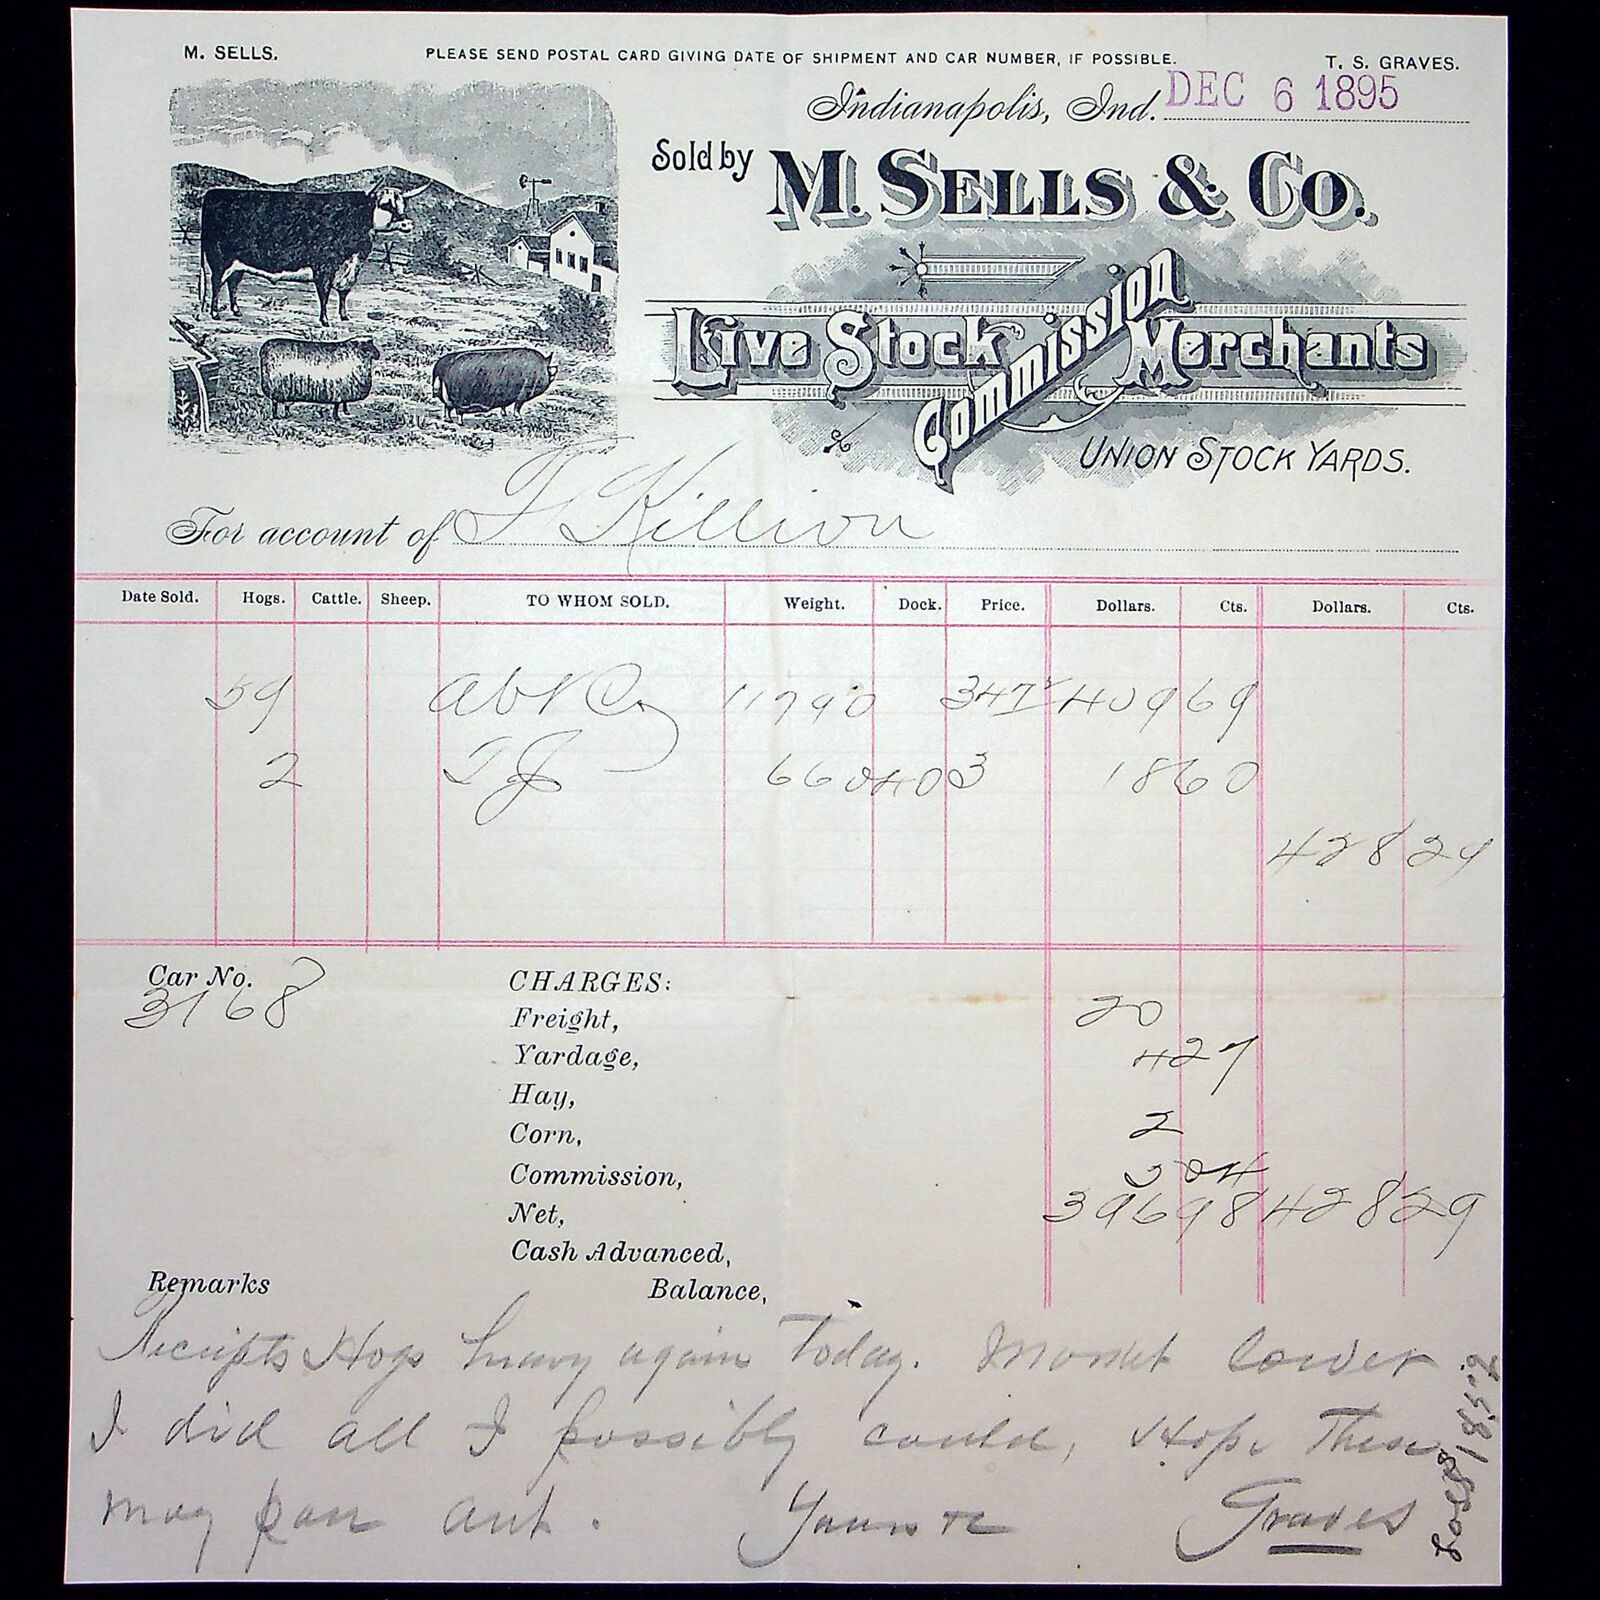 Live Stock Commission Letterhead 1895 Union Stock Yard M Sells & Co Indianapolis